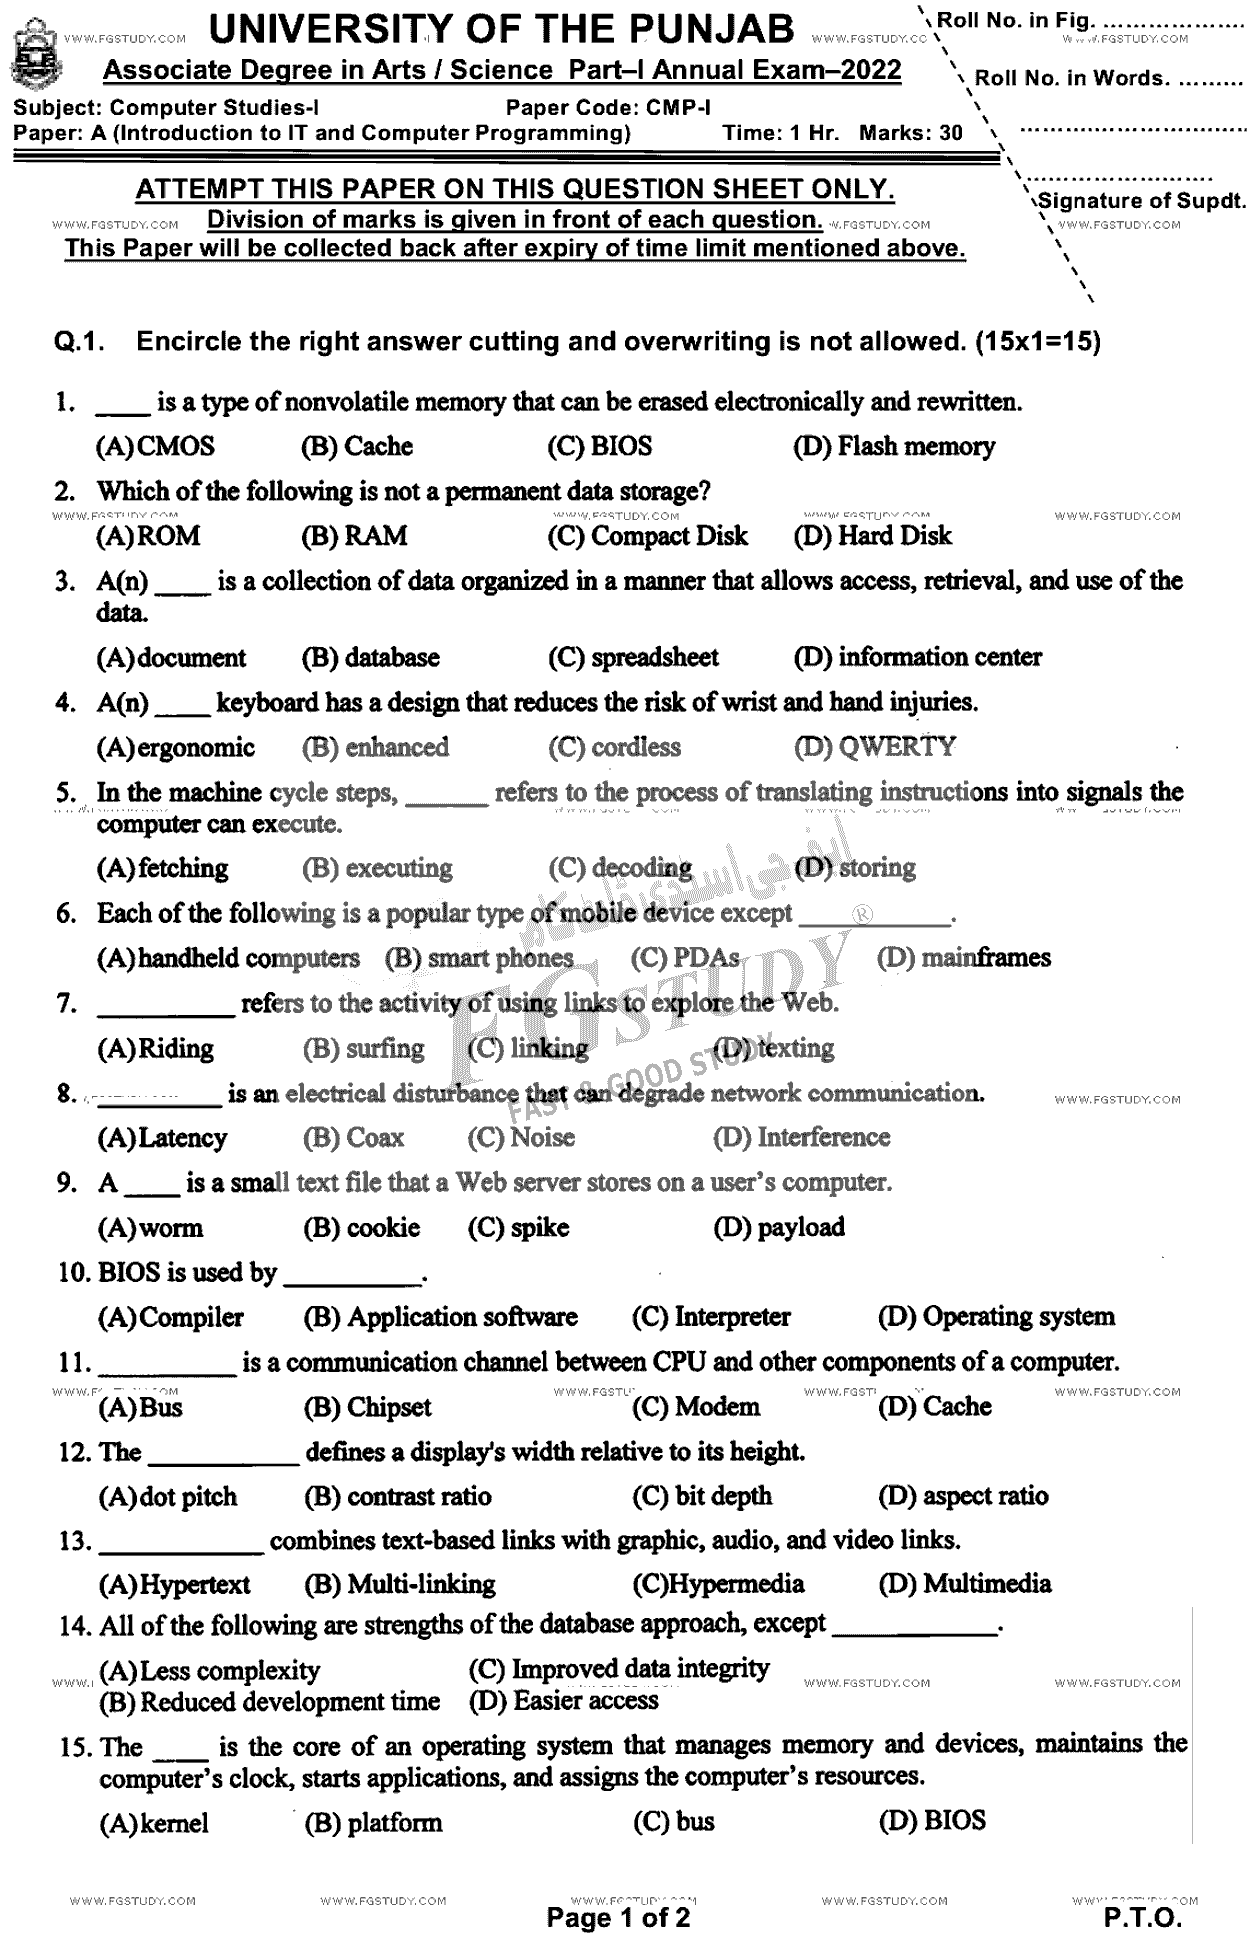 BSc Part 1 Computer Studies 1 Introduction To Information Technology And Computer Programming Past Paper 2022 Punjab University Objective